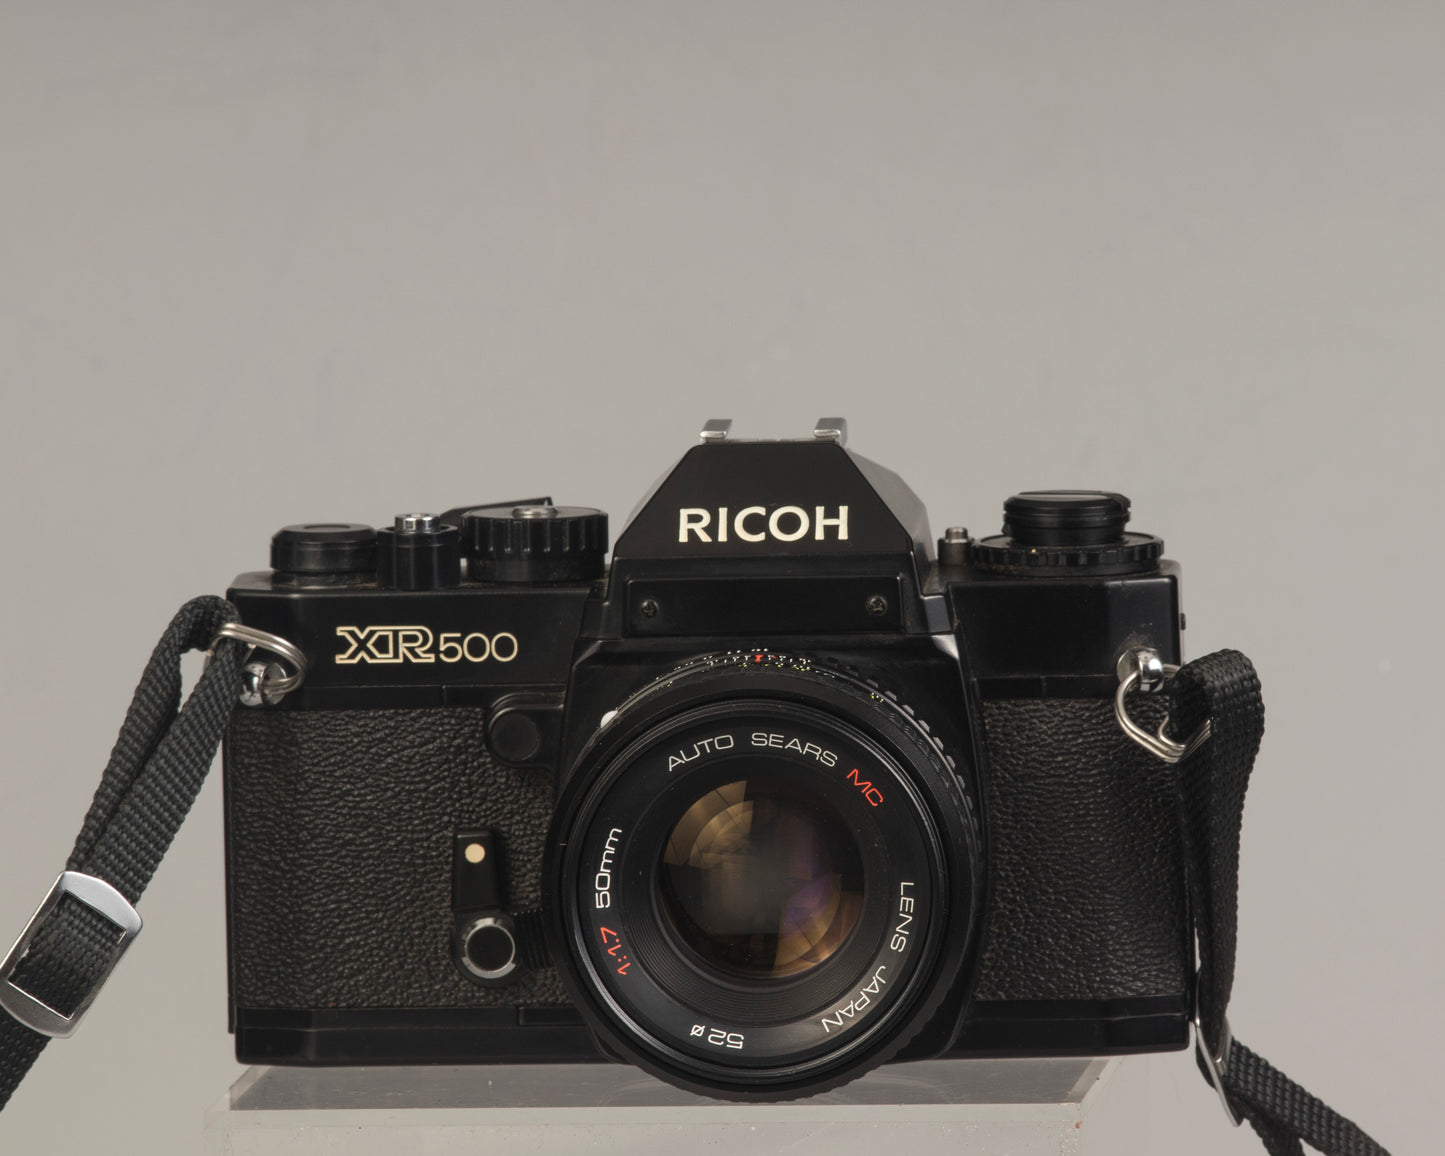 Ricoh XR-500 (aka KR-5) with Auto Sears MC 50mm f1.7 (a rebranded Ricoh lens) - front view